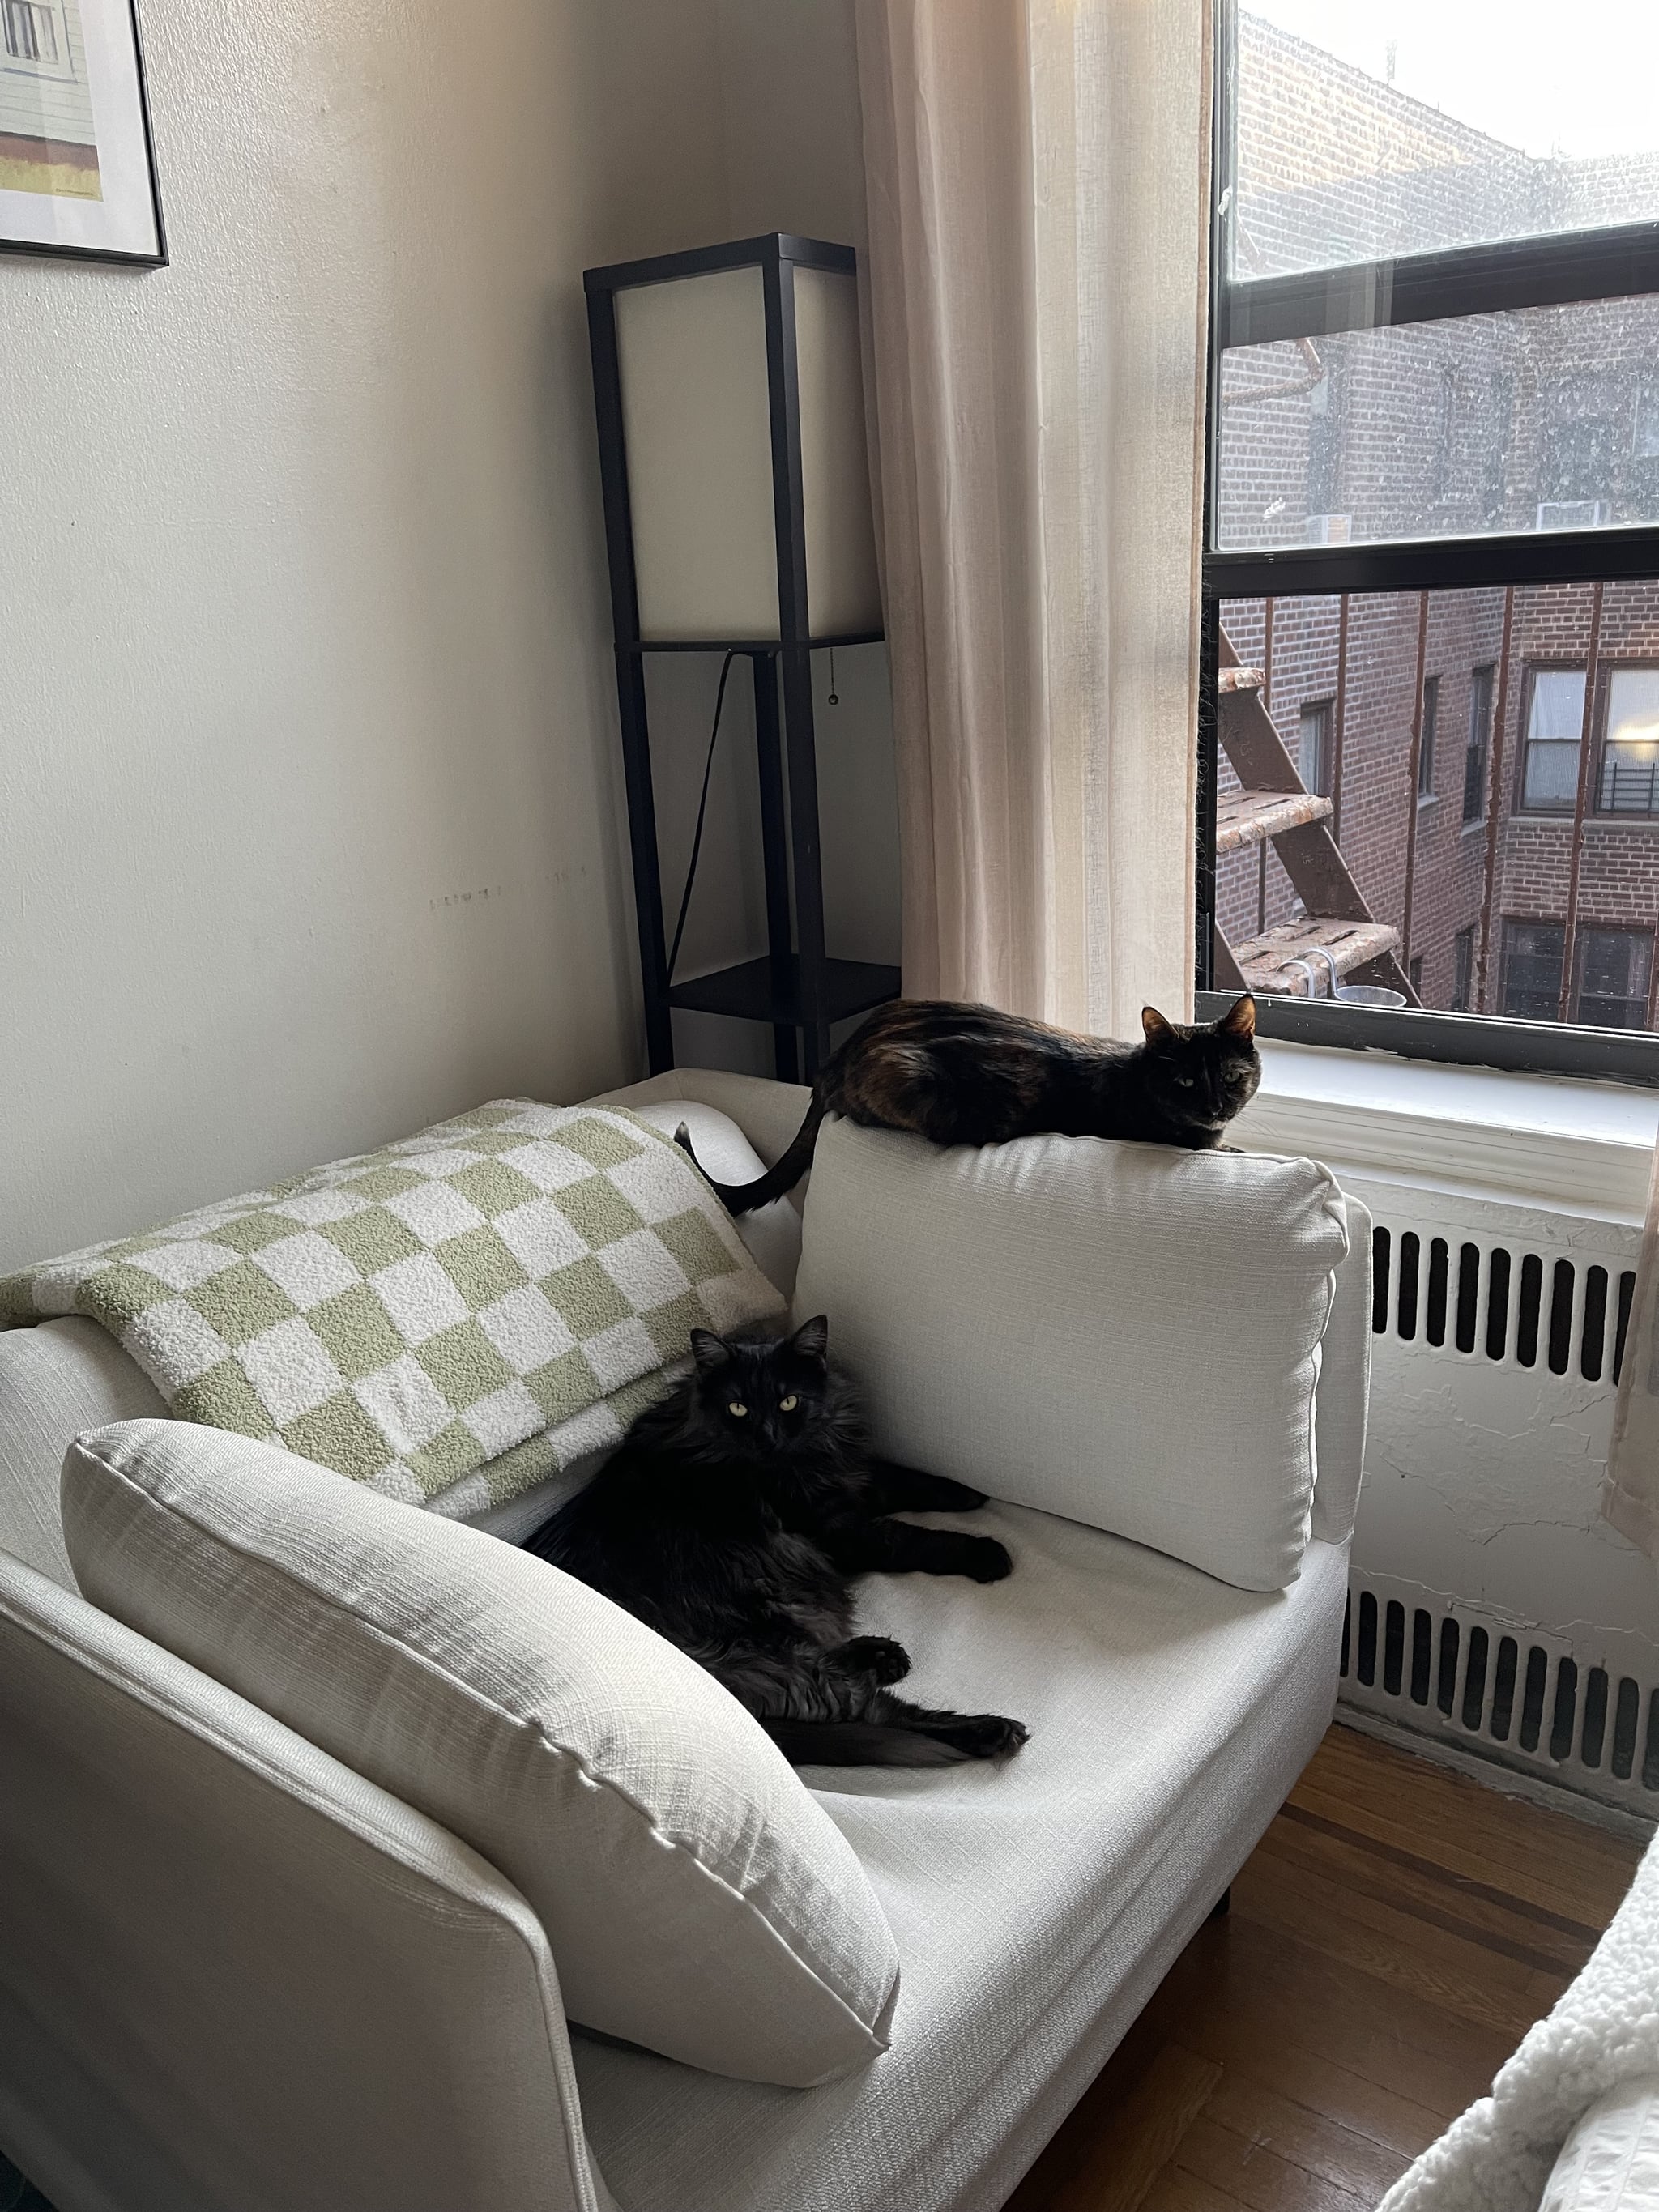 The Levity Stratus Armchair and a Half in corner of the room near a window with two cats on it.